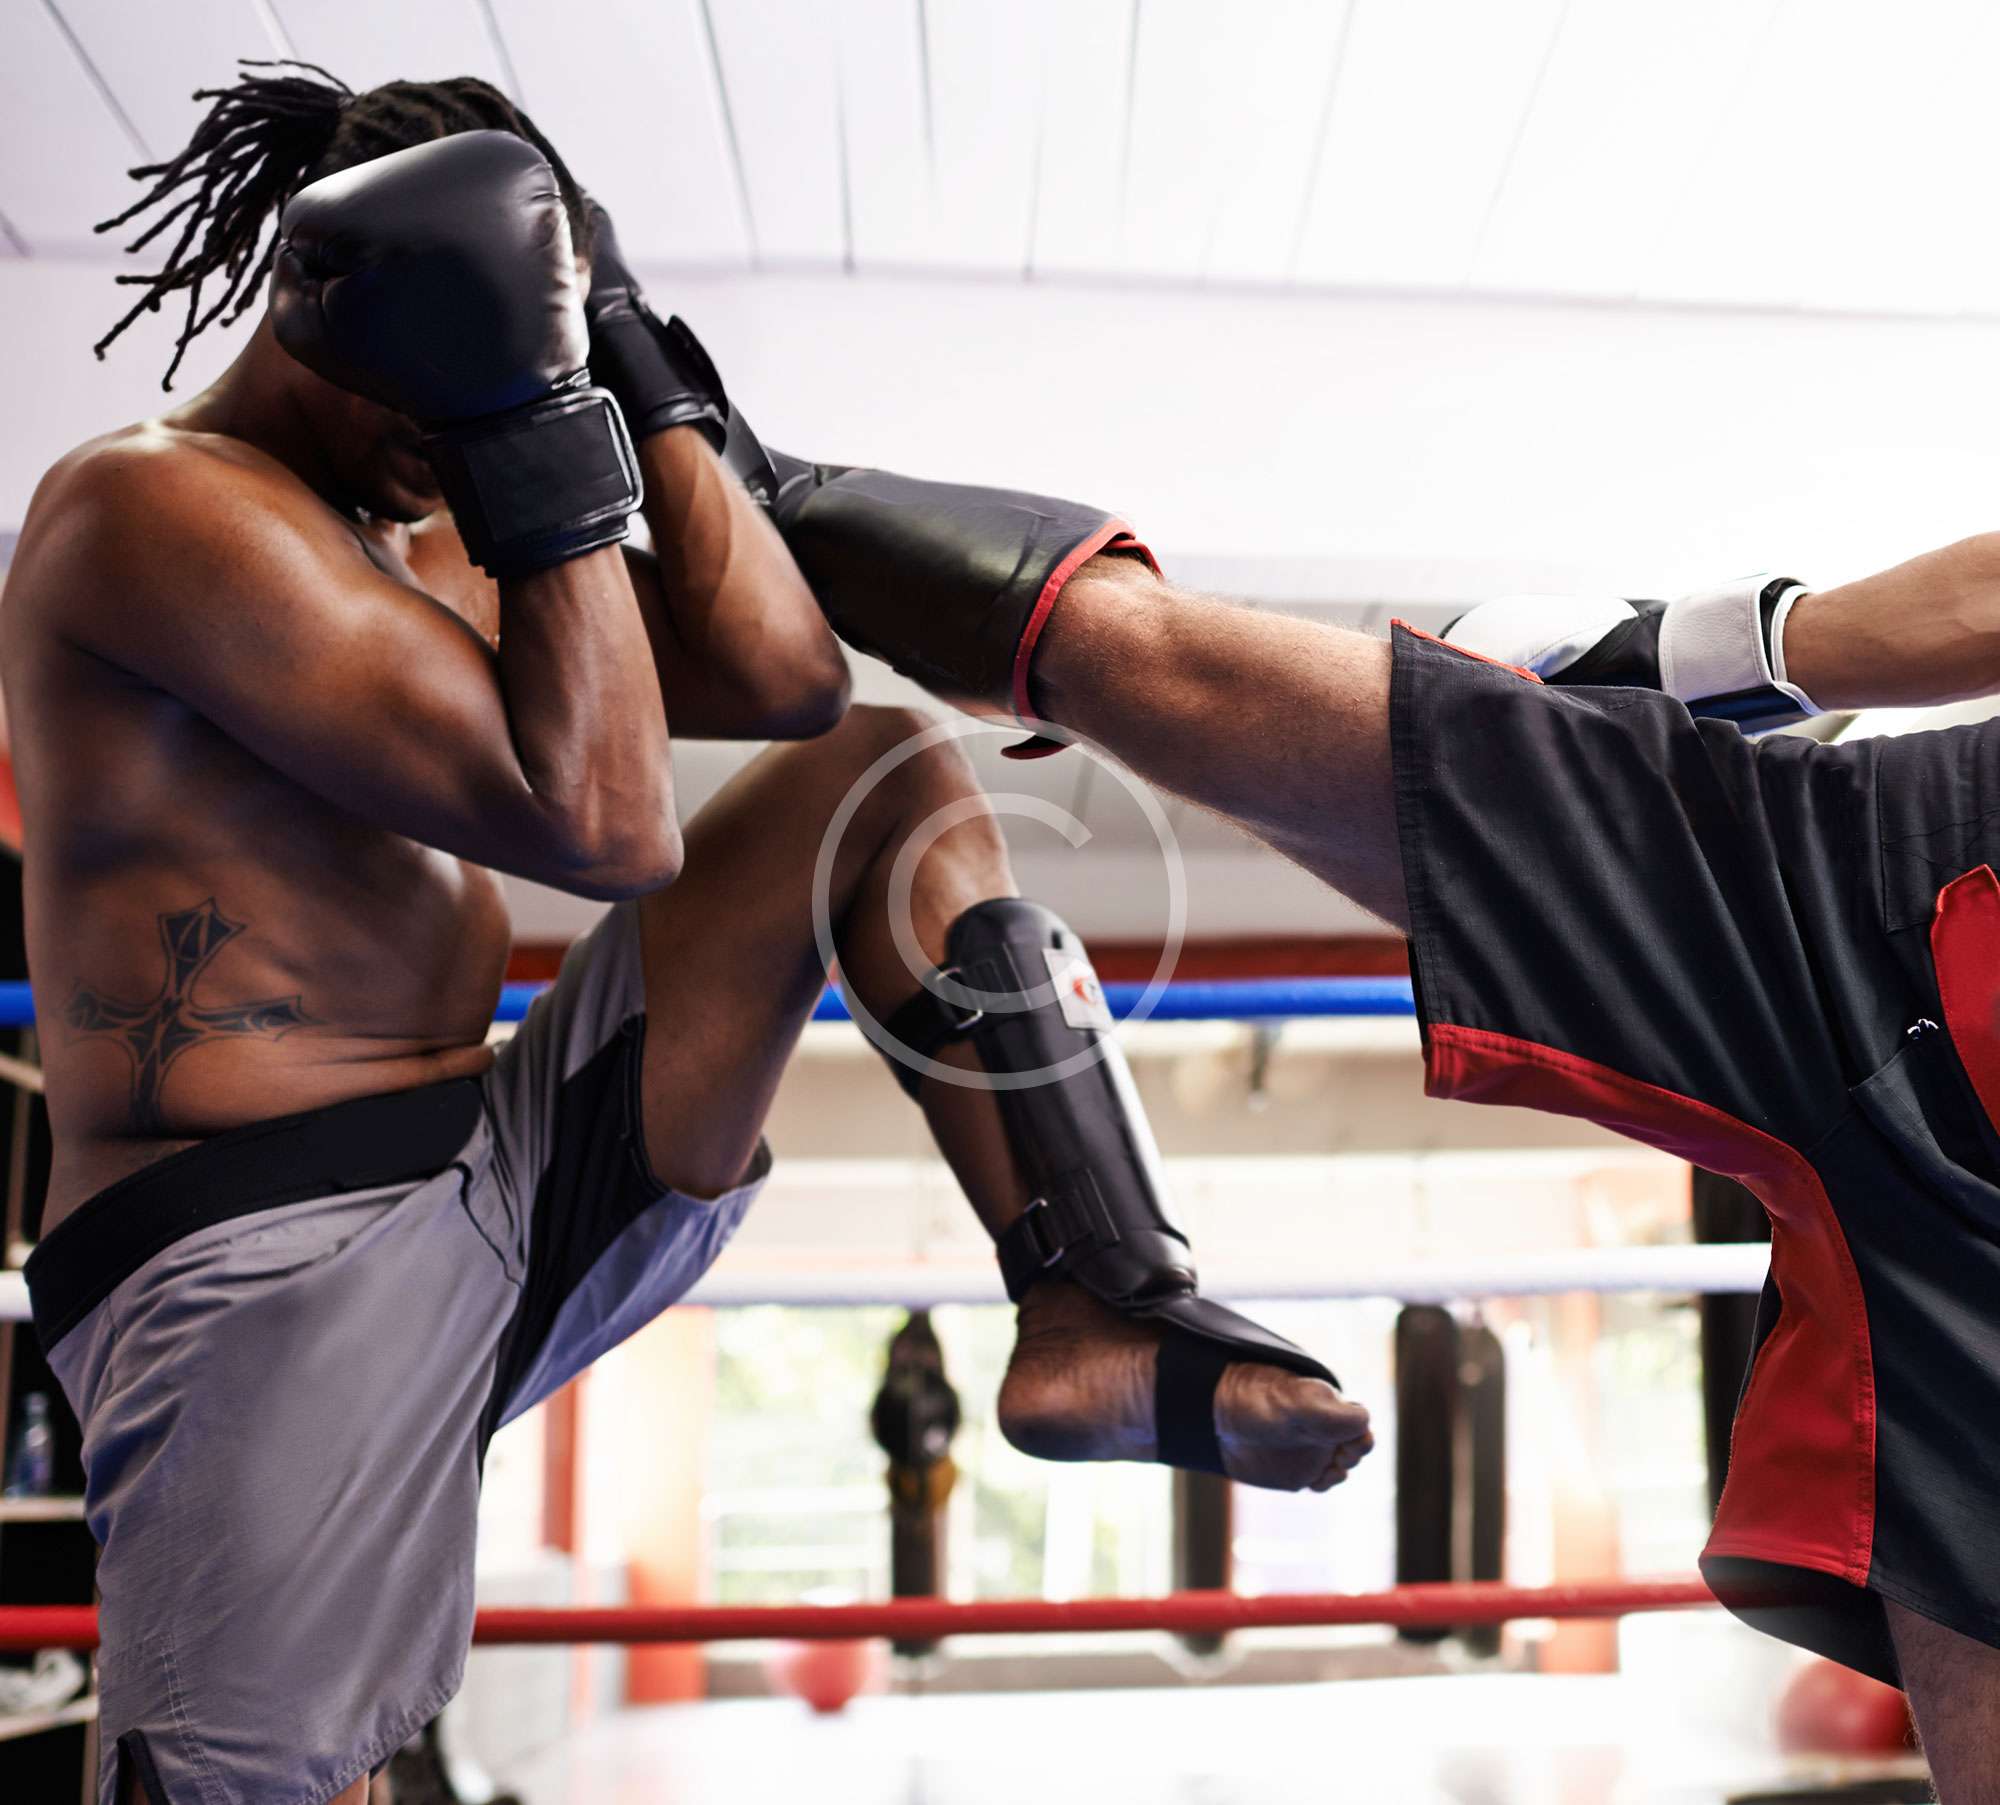 Kickboxing classes: 6 benefits you haven’t thought of